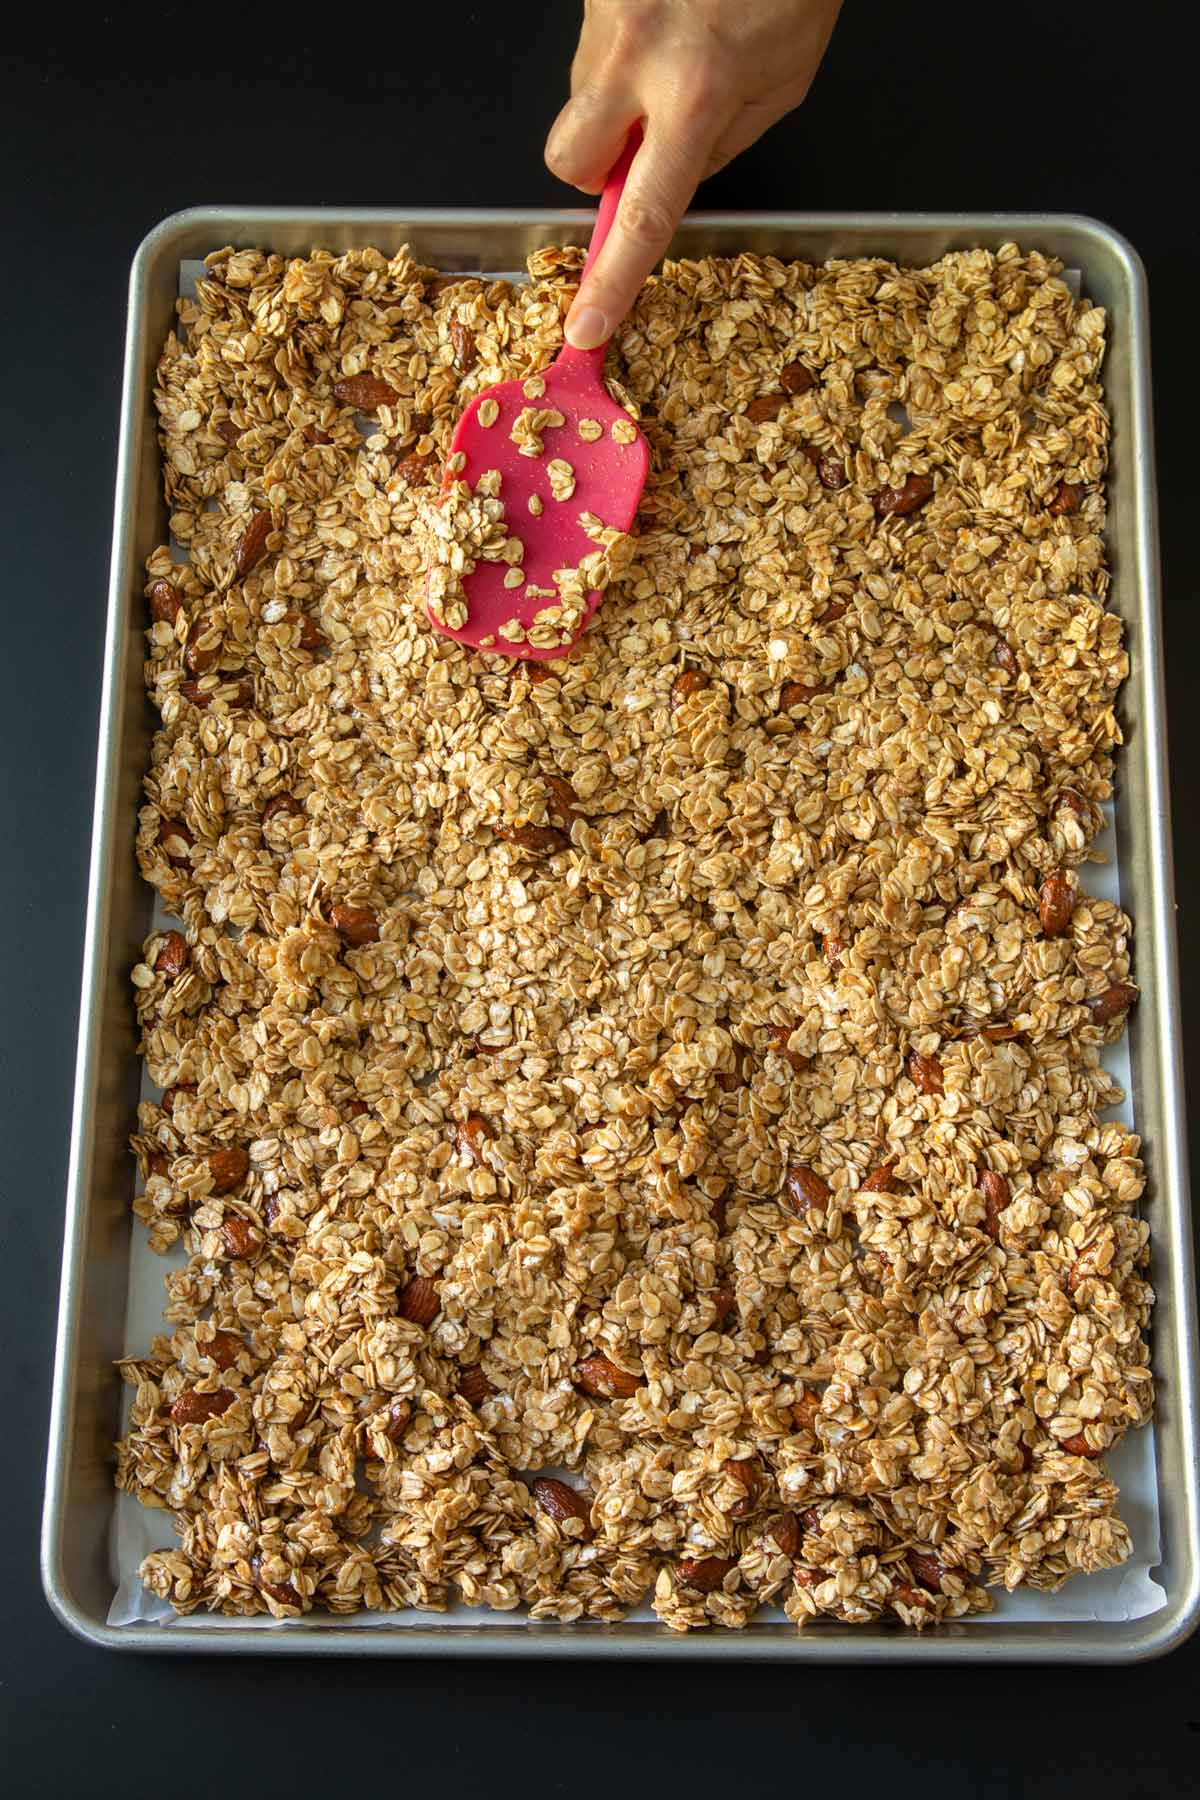 spreading granola mixture into sheet pan for baking with a red spatula.